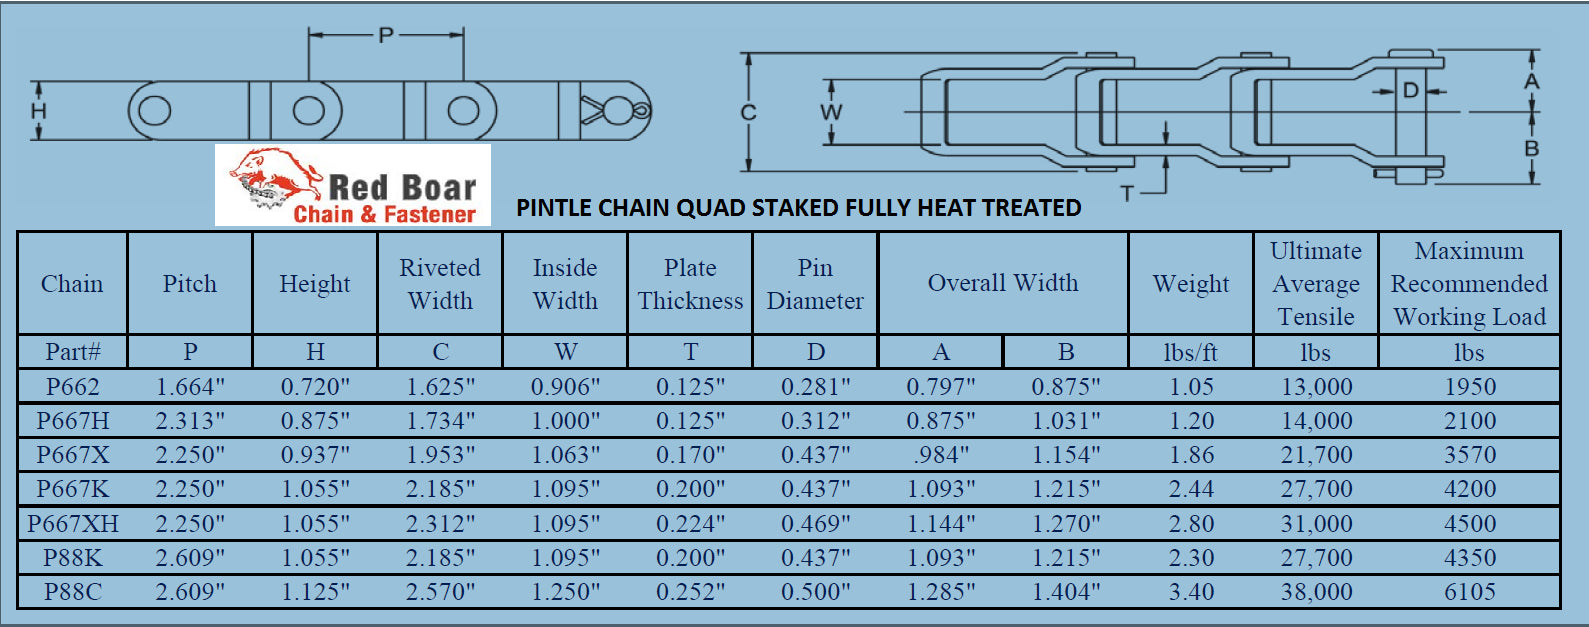 Spec sheet 662 Pintle Chain 1.664" Pitch